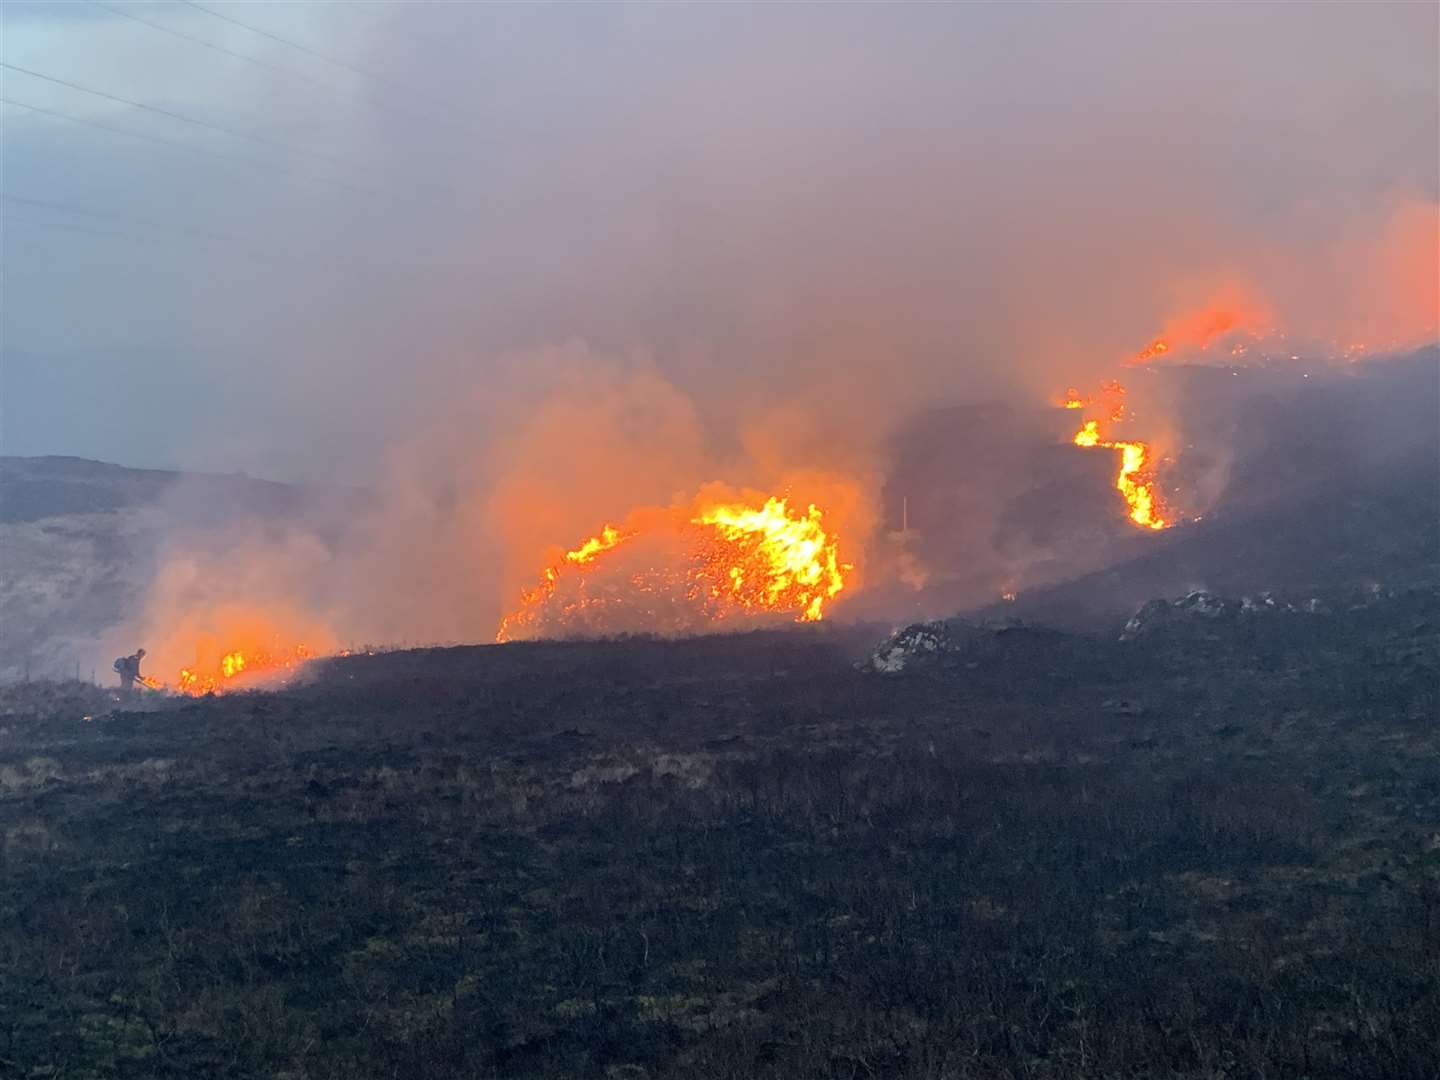 Wildfire in north Sutherland earlier this year.